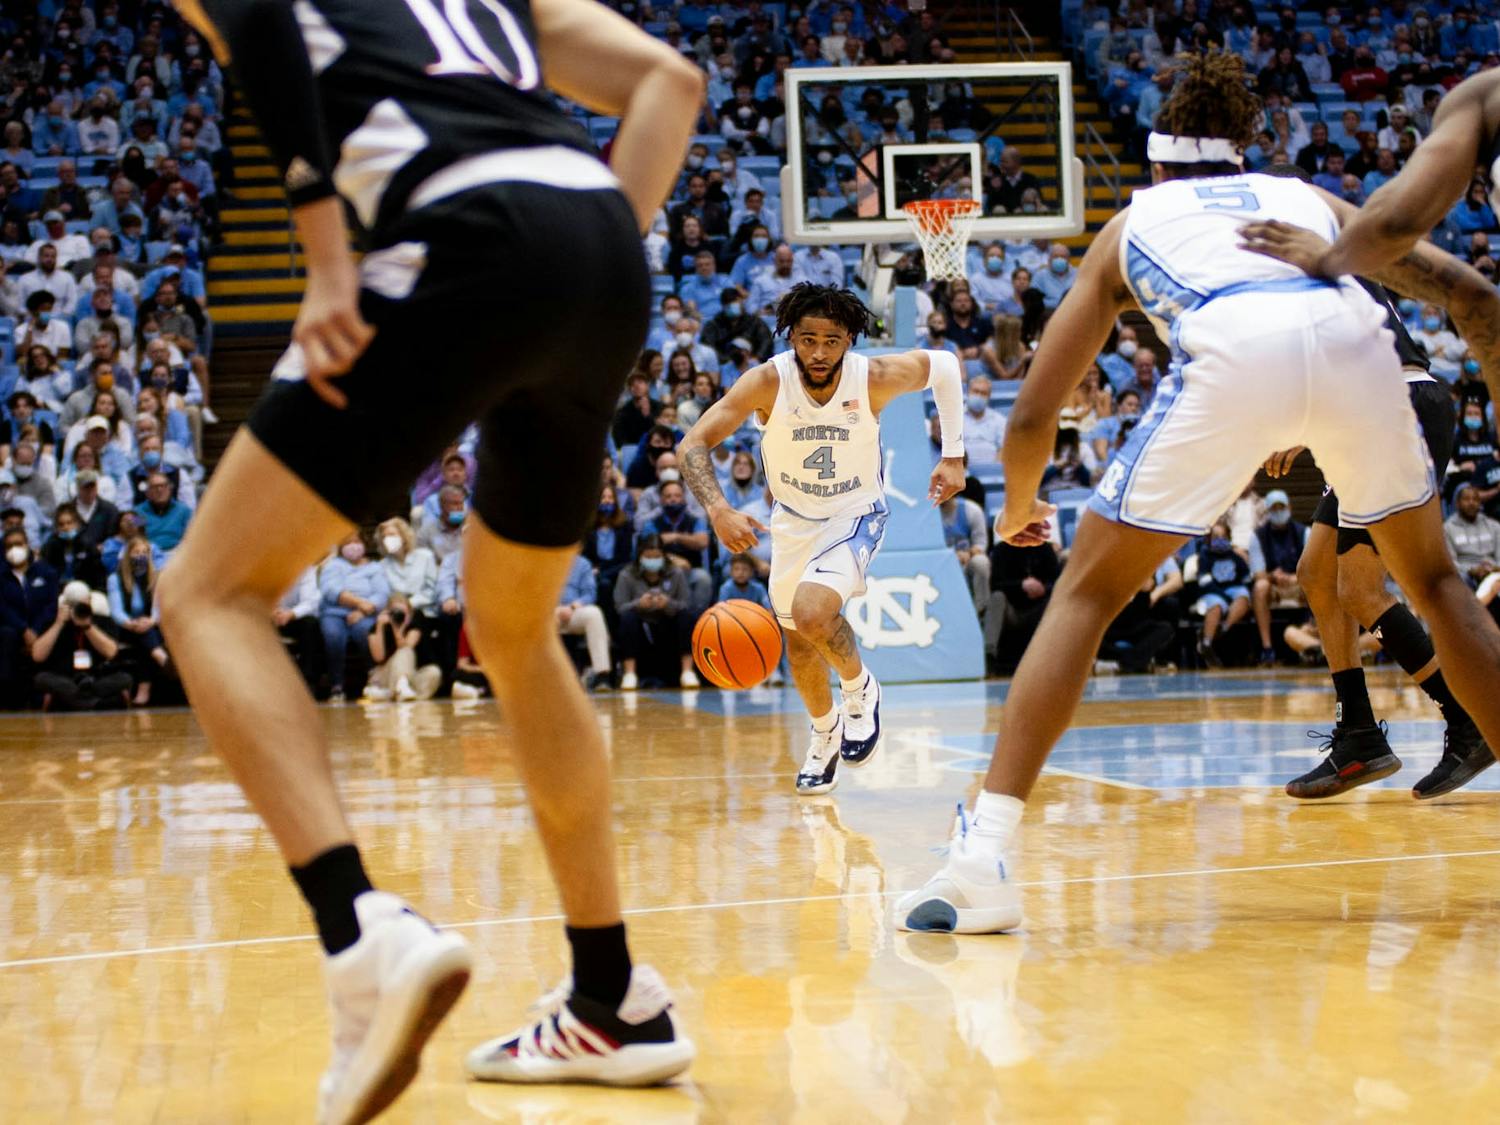 UNC sophomore guard RJ Davis (4) drives the ball up the court during a home men's basketball game against Louisville on Monday, Feb. 21, 2022. UNC won 70-63.